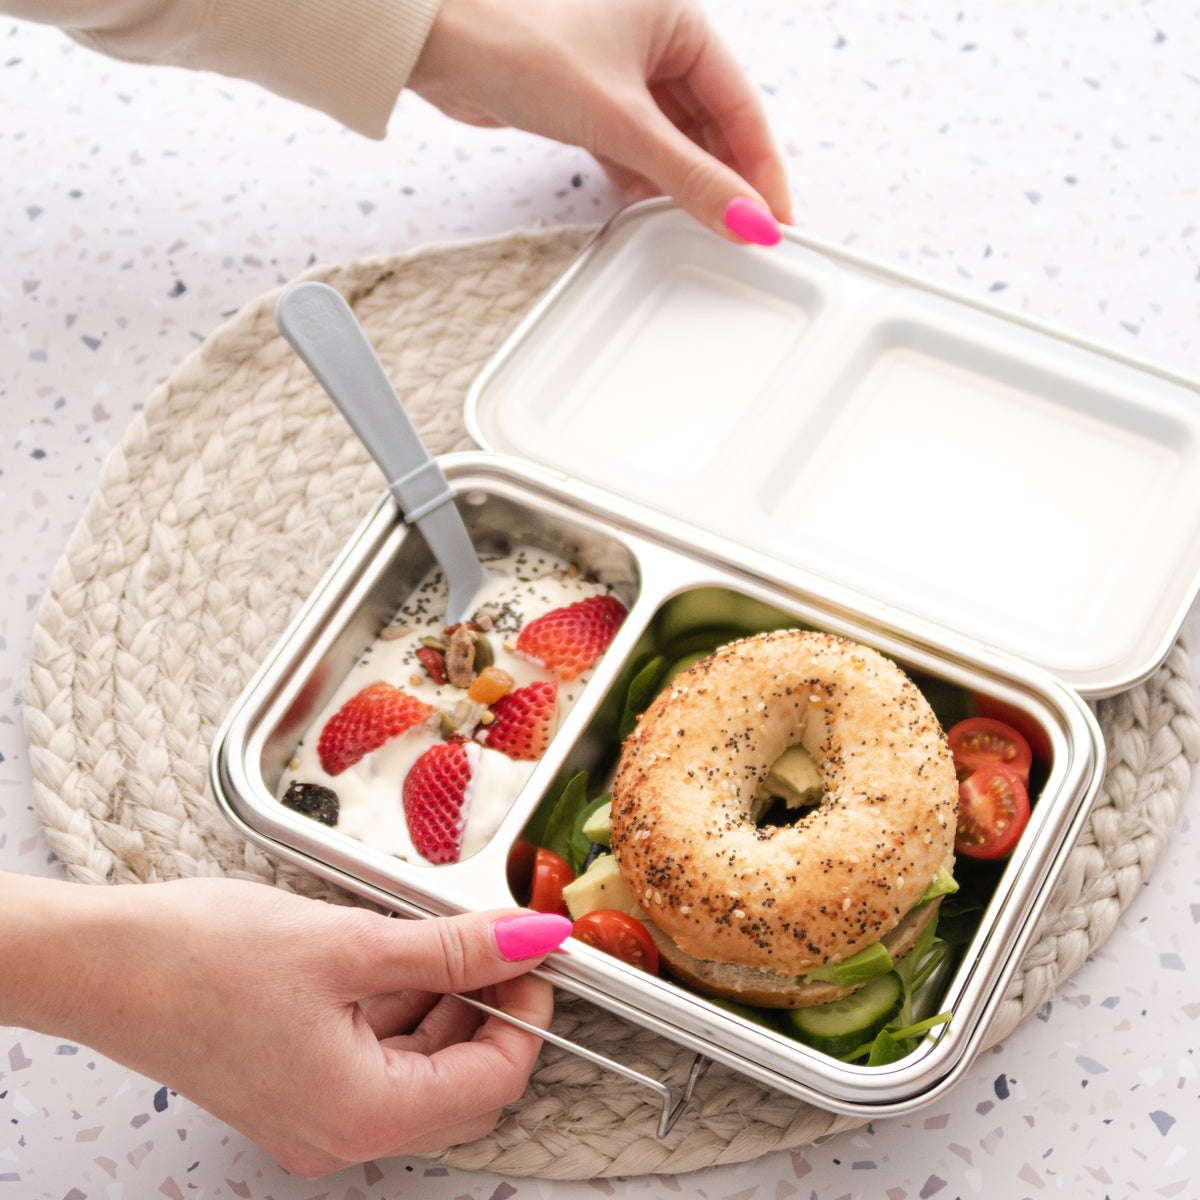 Nestling Stainless Steel Duo Lunchbox